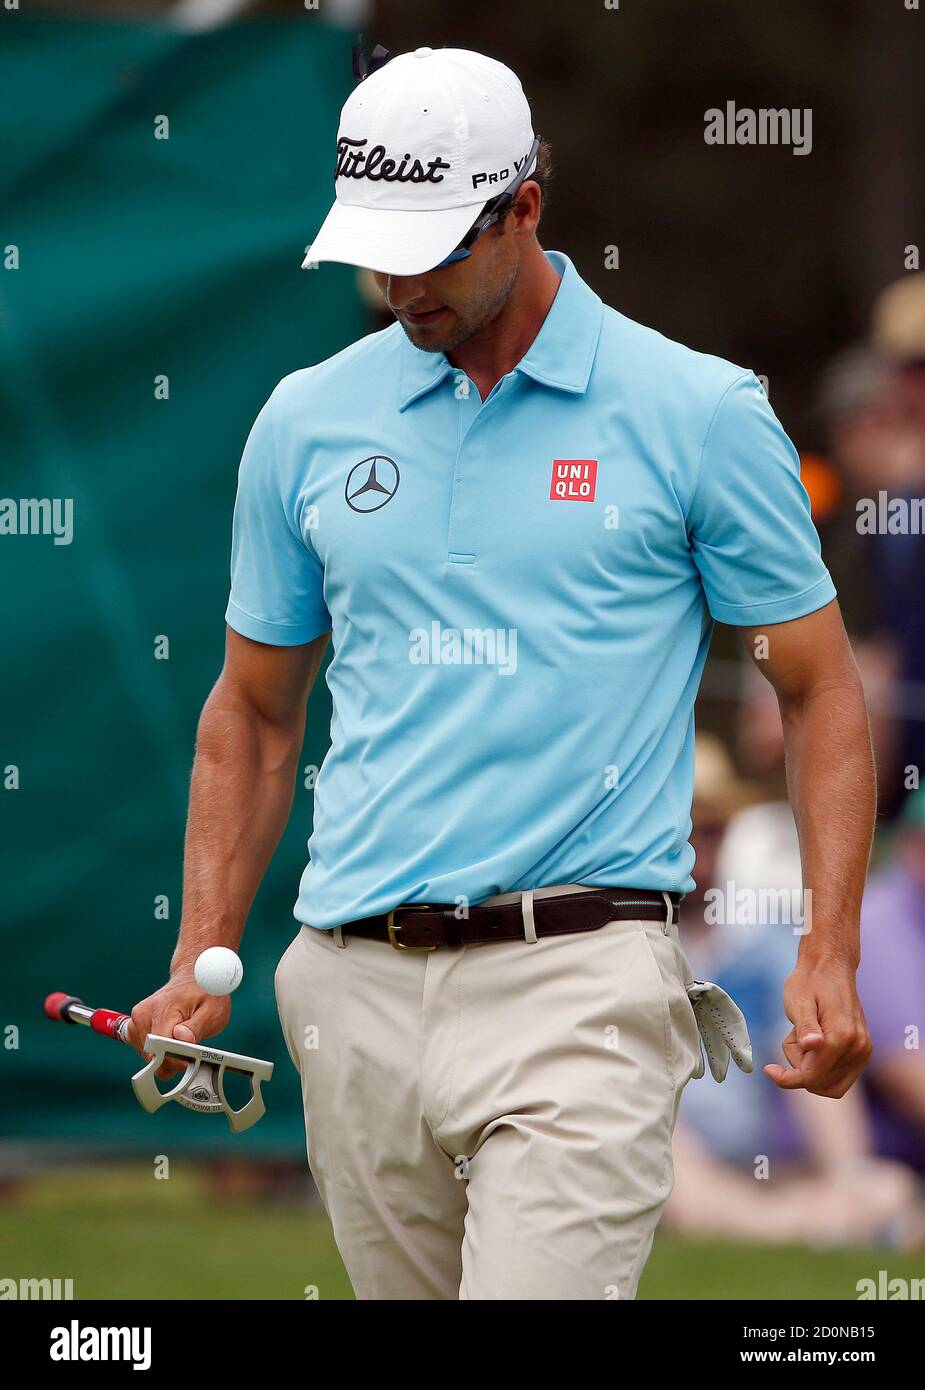 Adam Scott of Australia bounces his ball on his putter after missing a putt on the 16th hole during the final round of the Australian Open golf tournament at The Australian Golf Club in Sydney, November 30, 2014.    REUTERS/David Gray      (AUSTRALIA - Tags: SPORT GOLF) Stock Photo